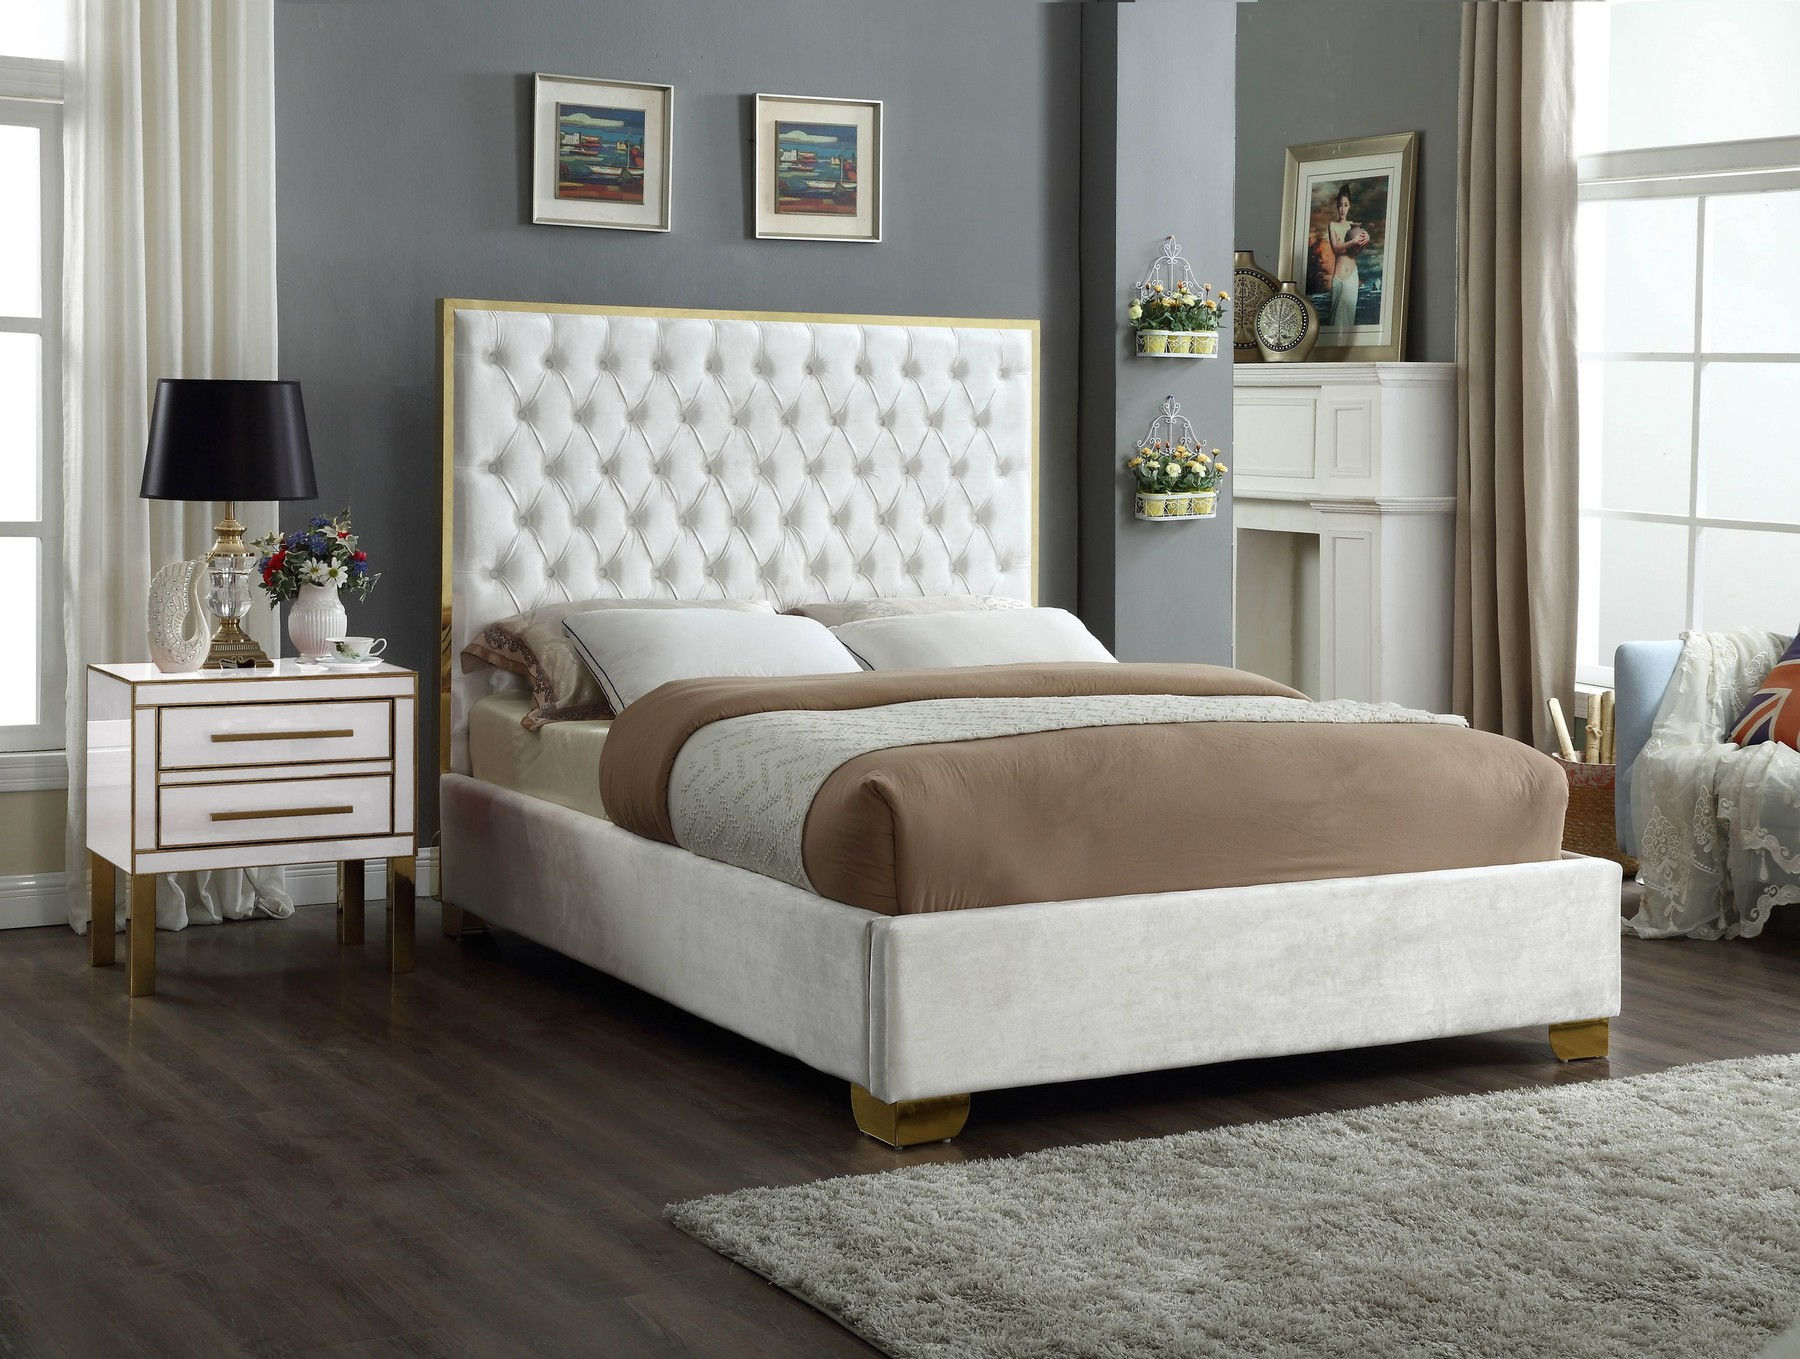 Lana White Queen Size Bed Lana Meridian Furniture Modern Beds Comfyco Furniture